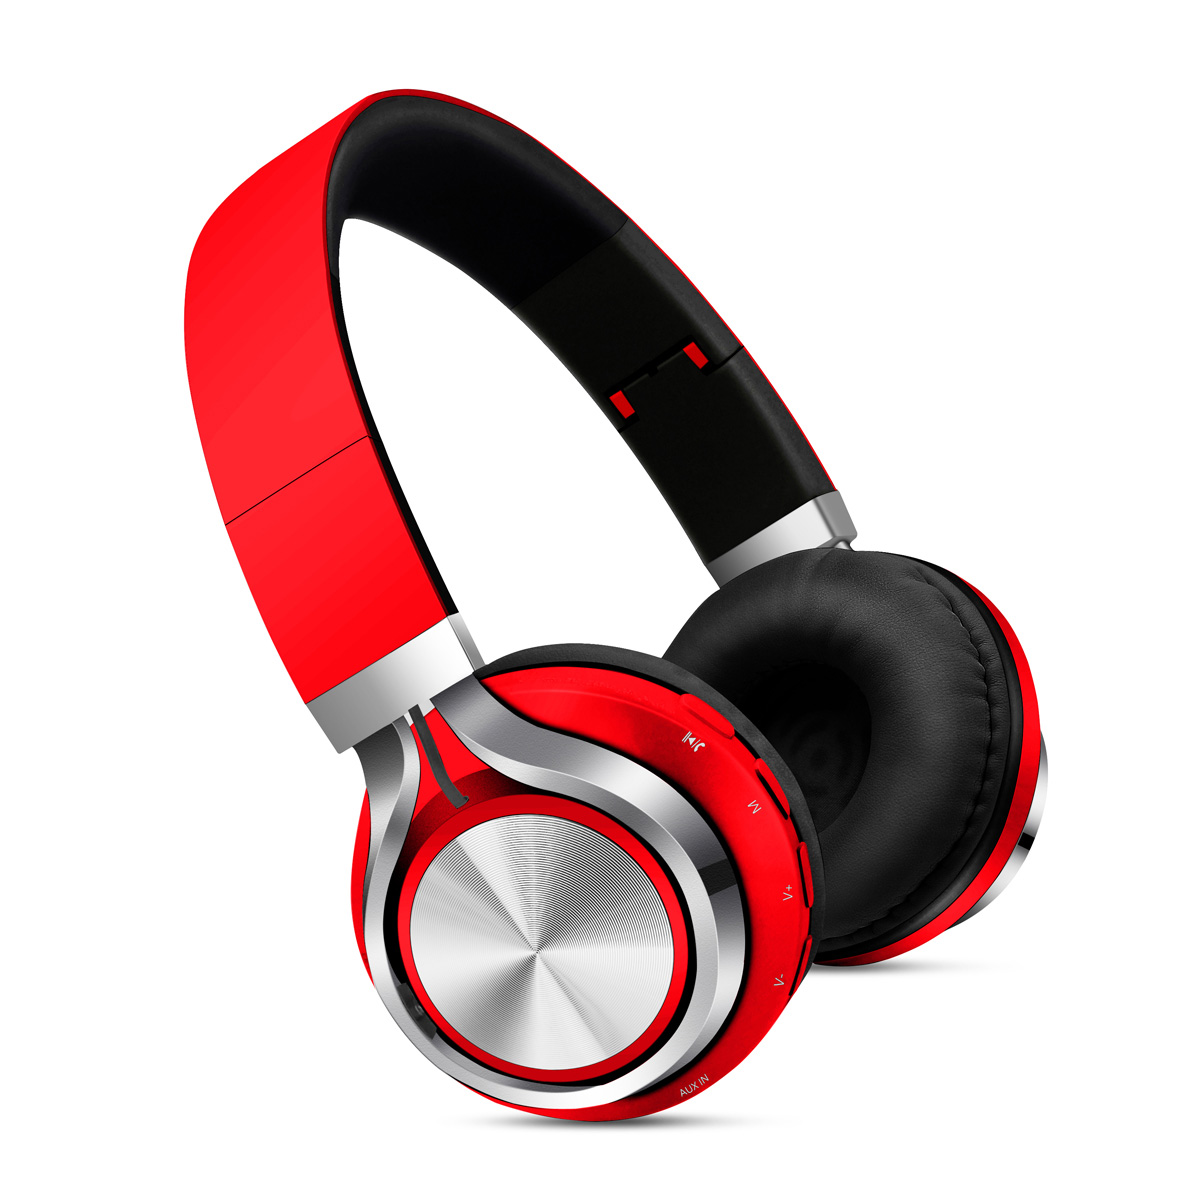 Super Bass Over the Ear Wireless Bluetooth Stereo HEADPHONE SK-01 (Red)